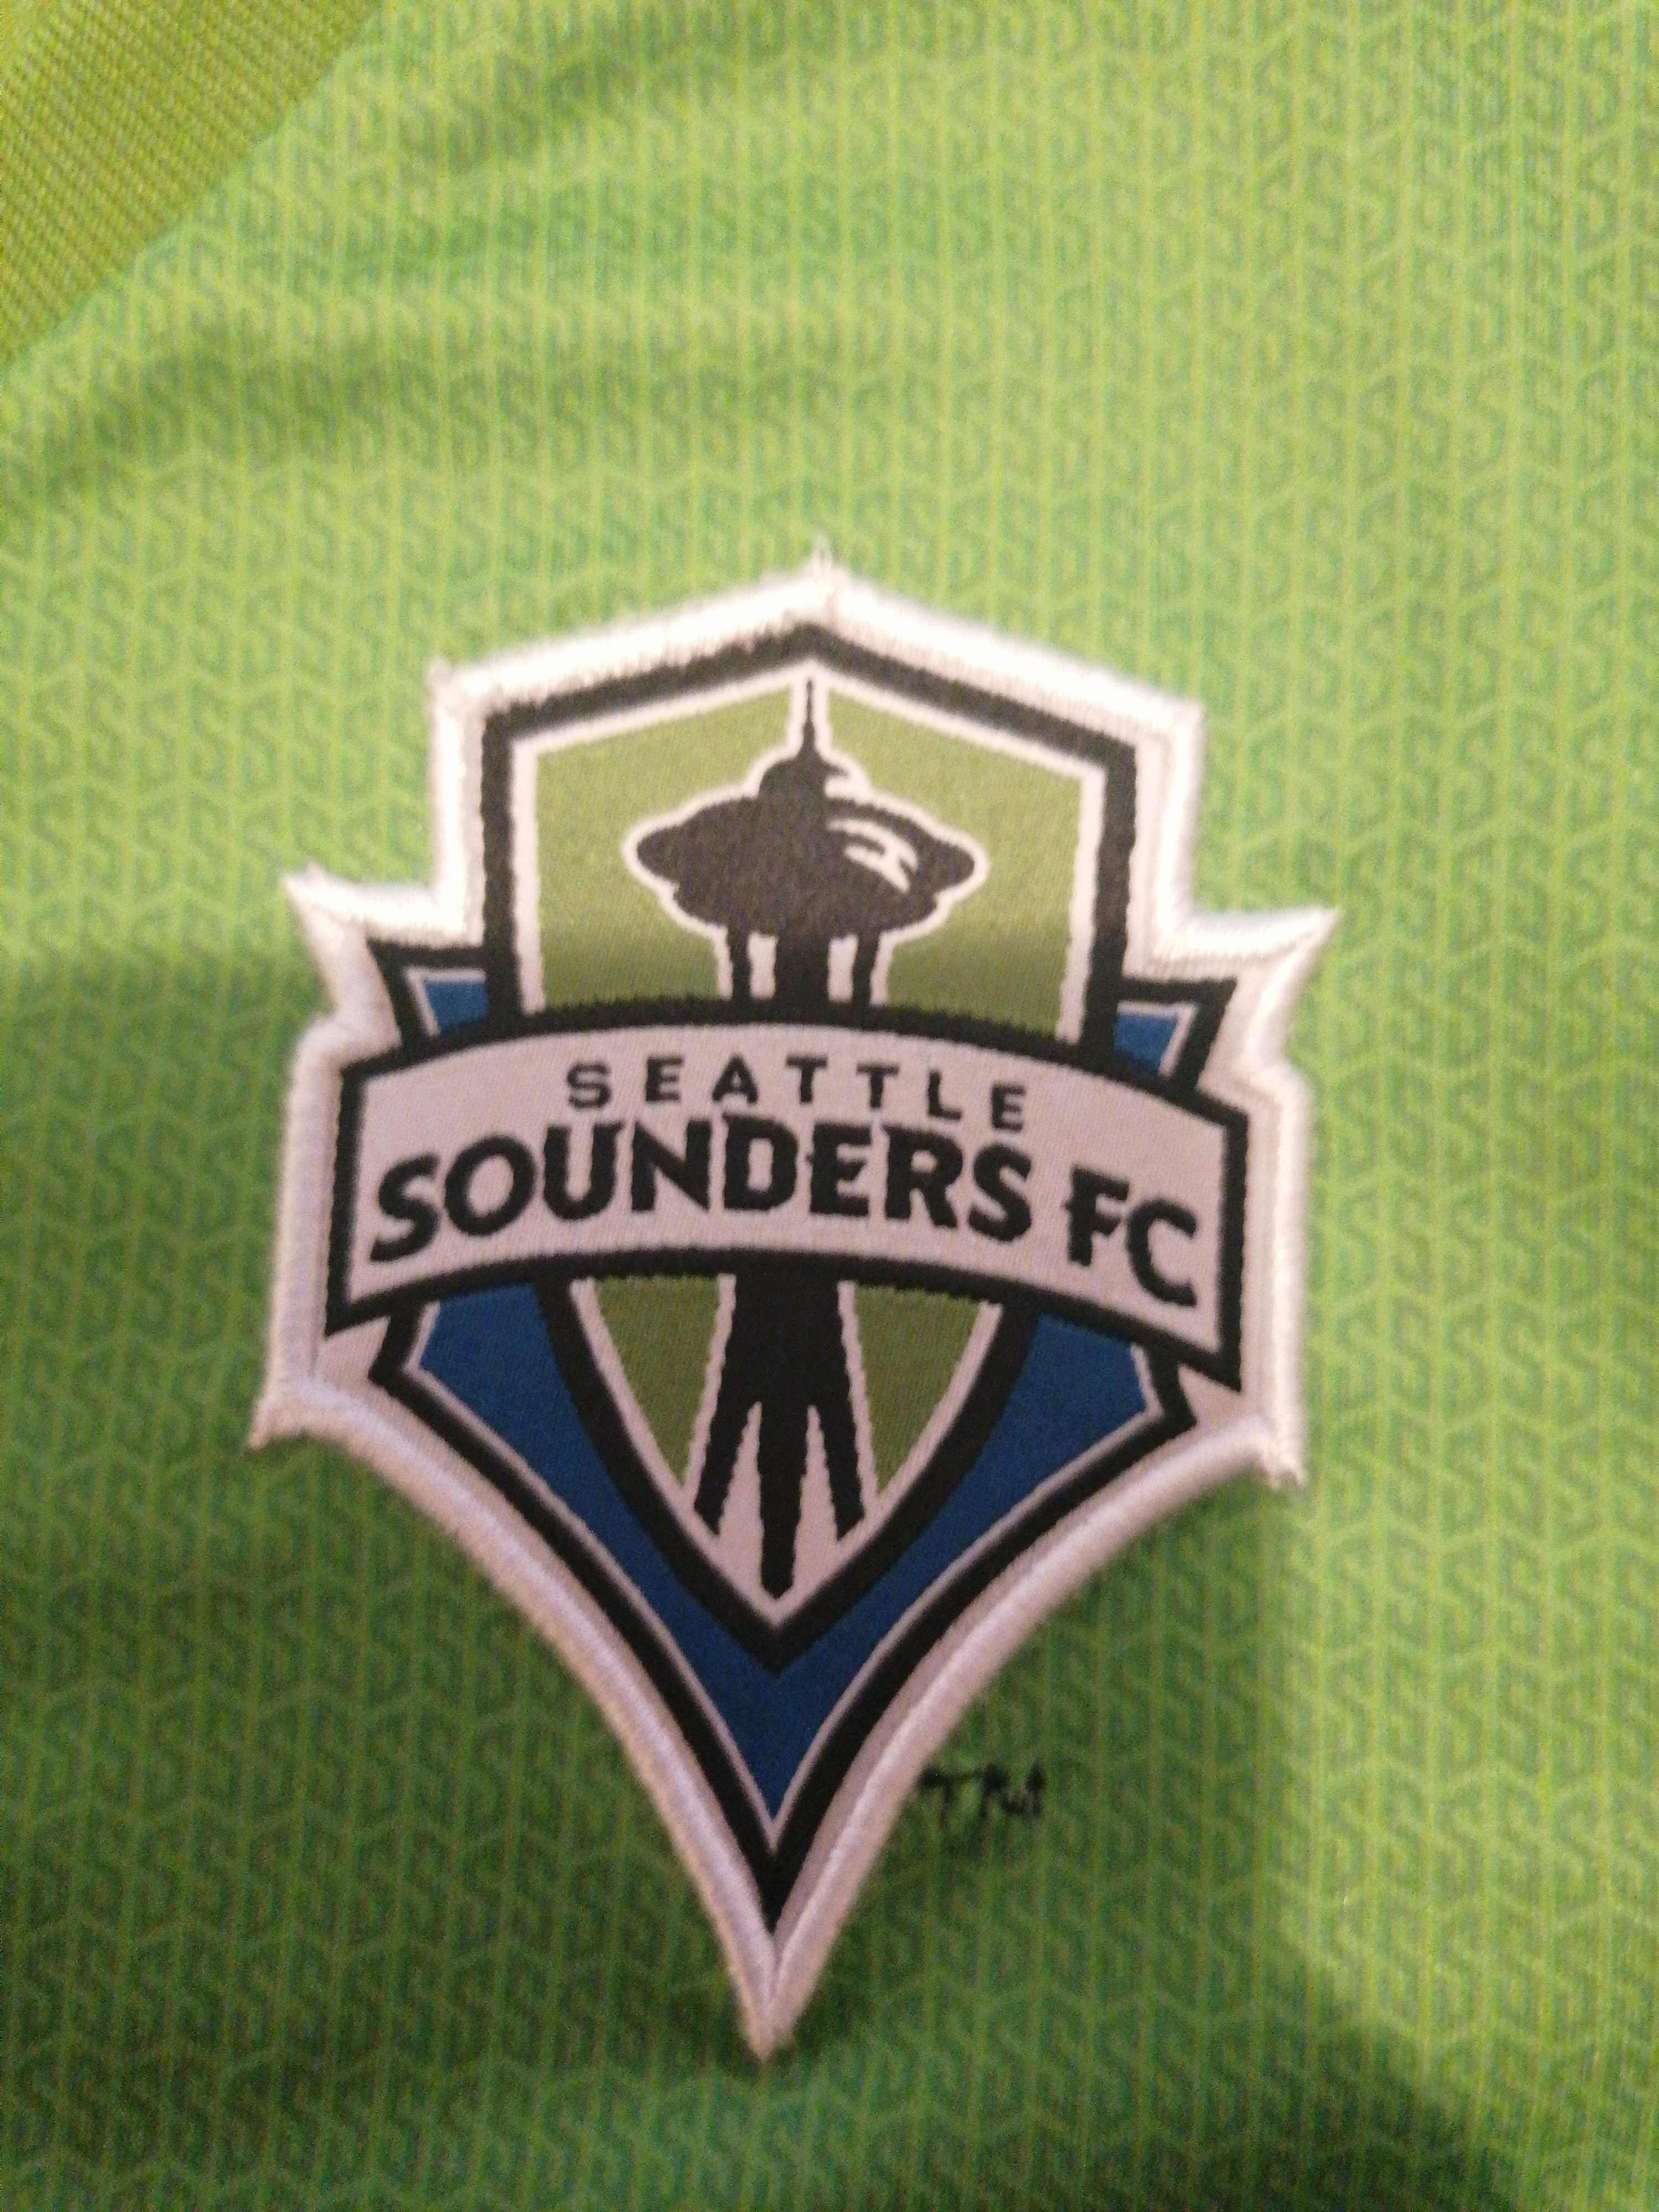 Camisola oficial Seattle Sounders Fc